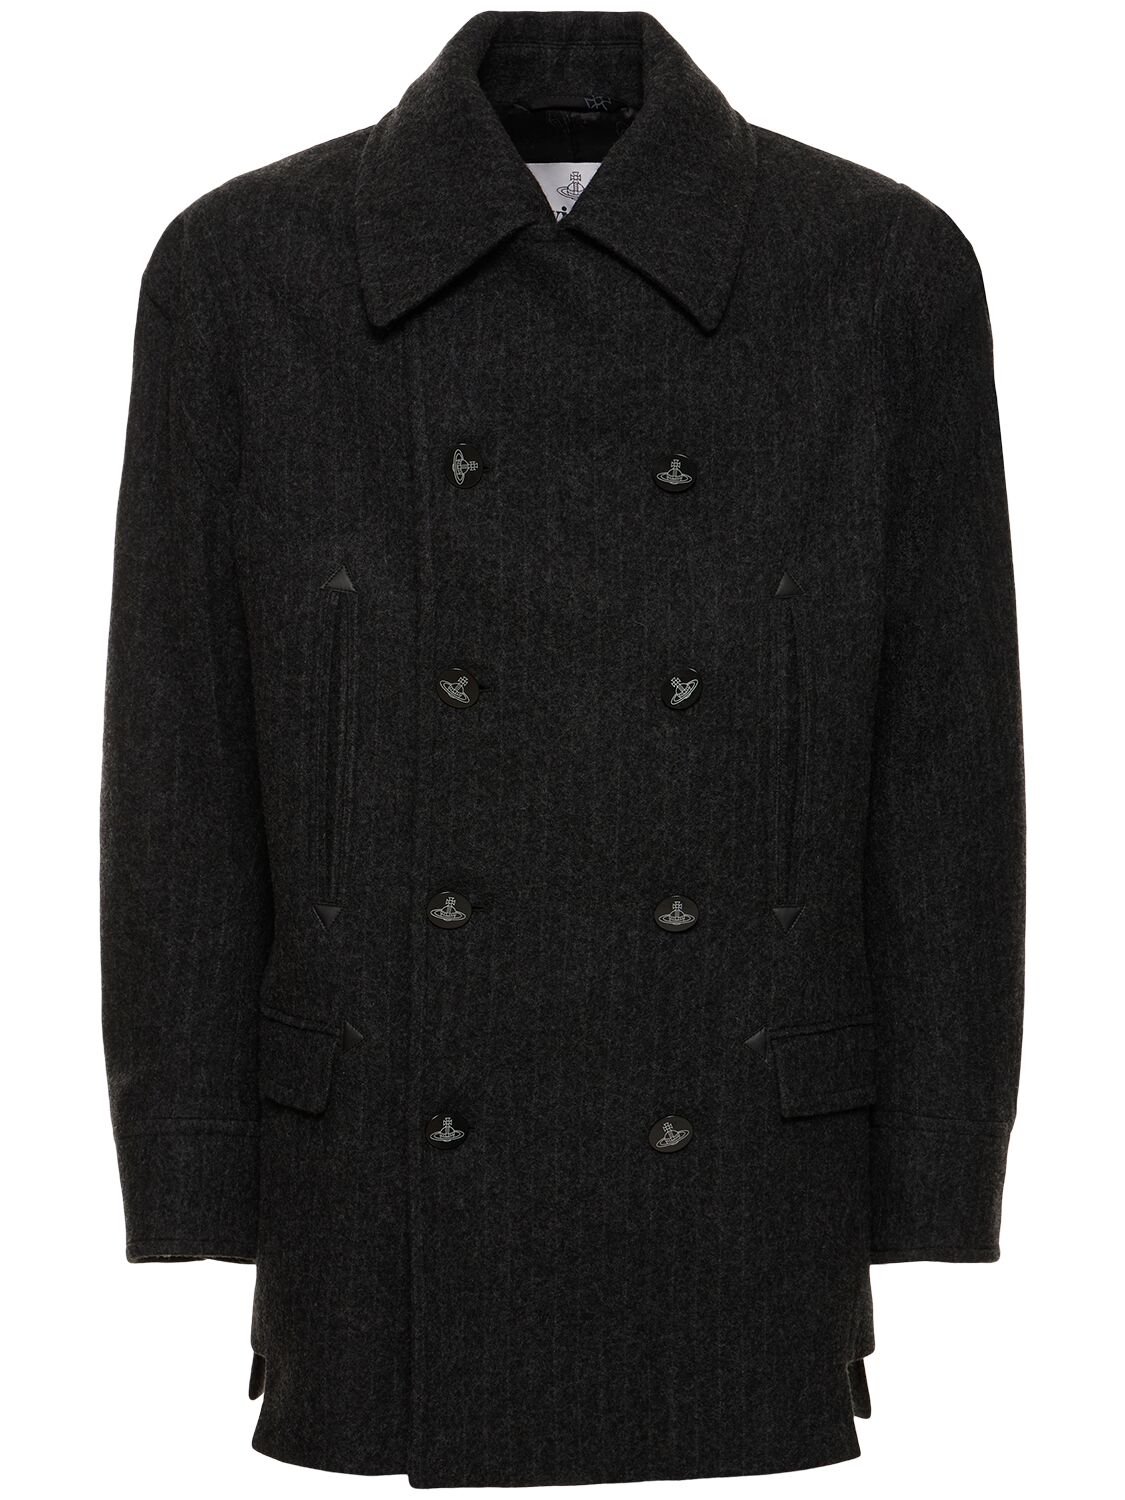 Image of Virgin Wool & Cashmere Blend Peacoat